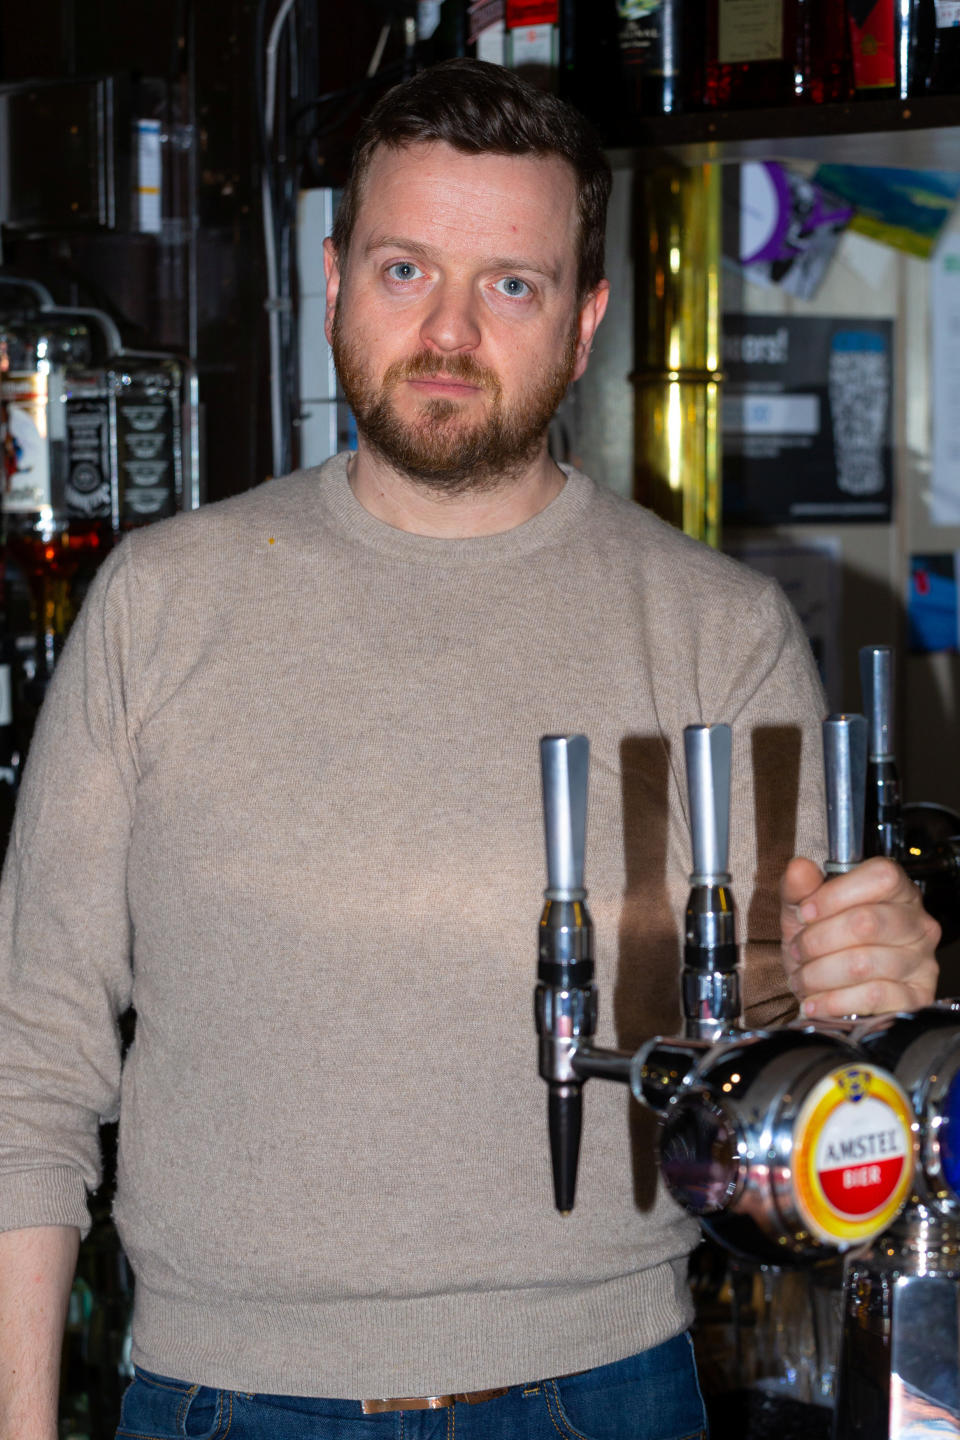 **PICTURE RELEASED FOR SUNDAY PRINT MEDIA - ONLINE EMBARGO UNTIL 6.00AM / SUNDAY 12 MAY, 2019**  Pub landlord Patrick Trenter, 38, at his pub the George and Dragon in Westerham, Kent. See SWNS story SWSYfarage. Former UKIP leader Nigel Farage has been banned from his local pub after he allegedly made a swift exit when he was involved in a head on crash with the landlord. Patrick Tranter, 38, was driving home with his one-year-old son when his Jaguar was hit by Farage's Range Rover, he claims. But instead of checking on Patrick and his son, the Eurosceptic MEP is said to have fled the scene. Patrick and his shaken baby son George were taken to hospital in an ambulance, and he claims his car has been written off. 